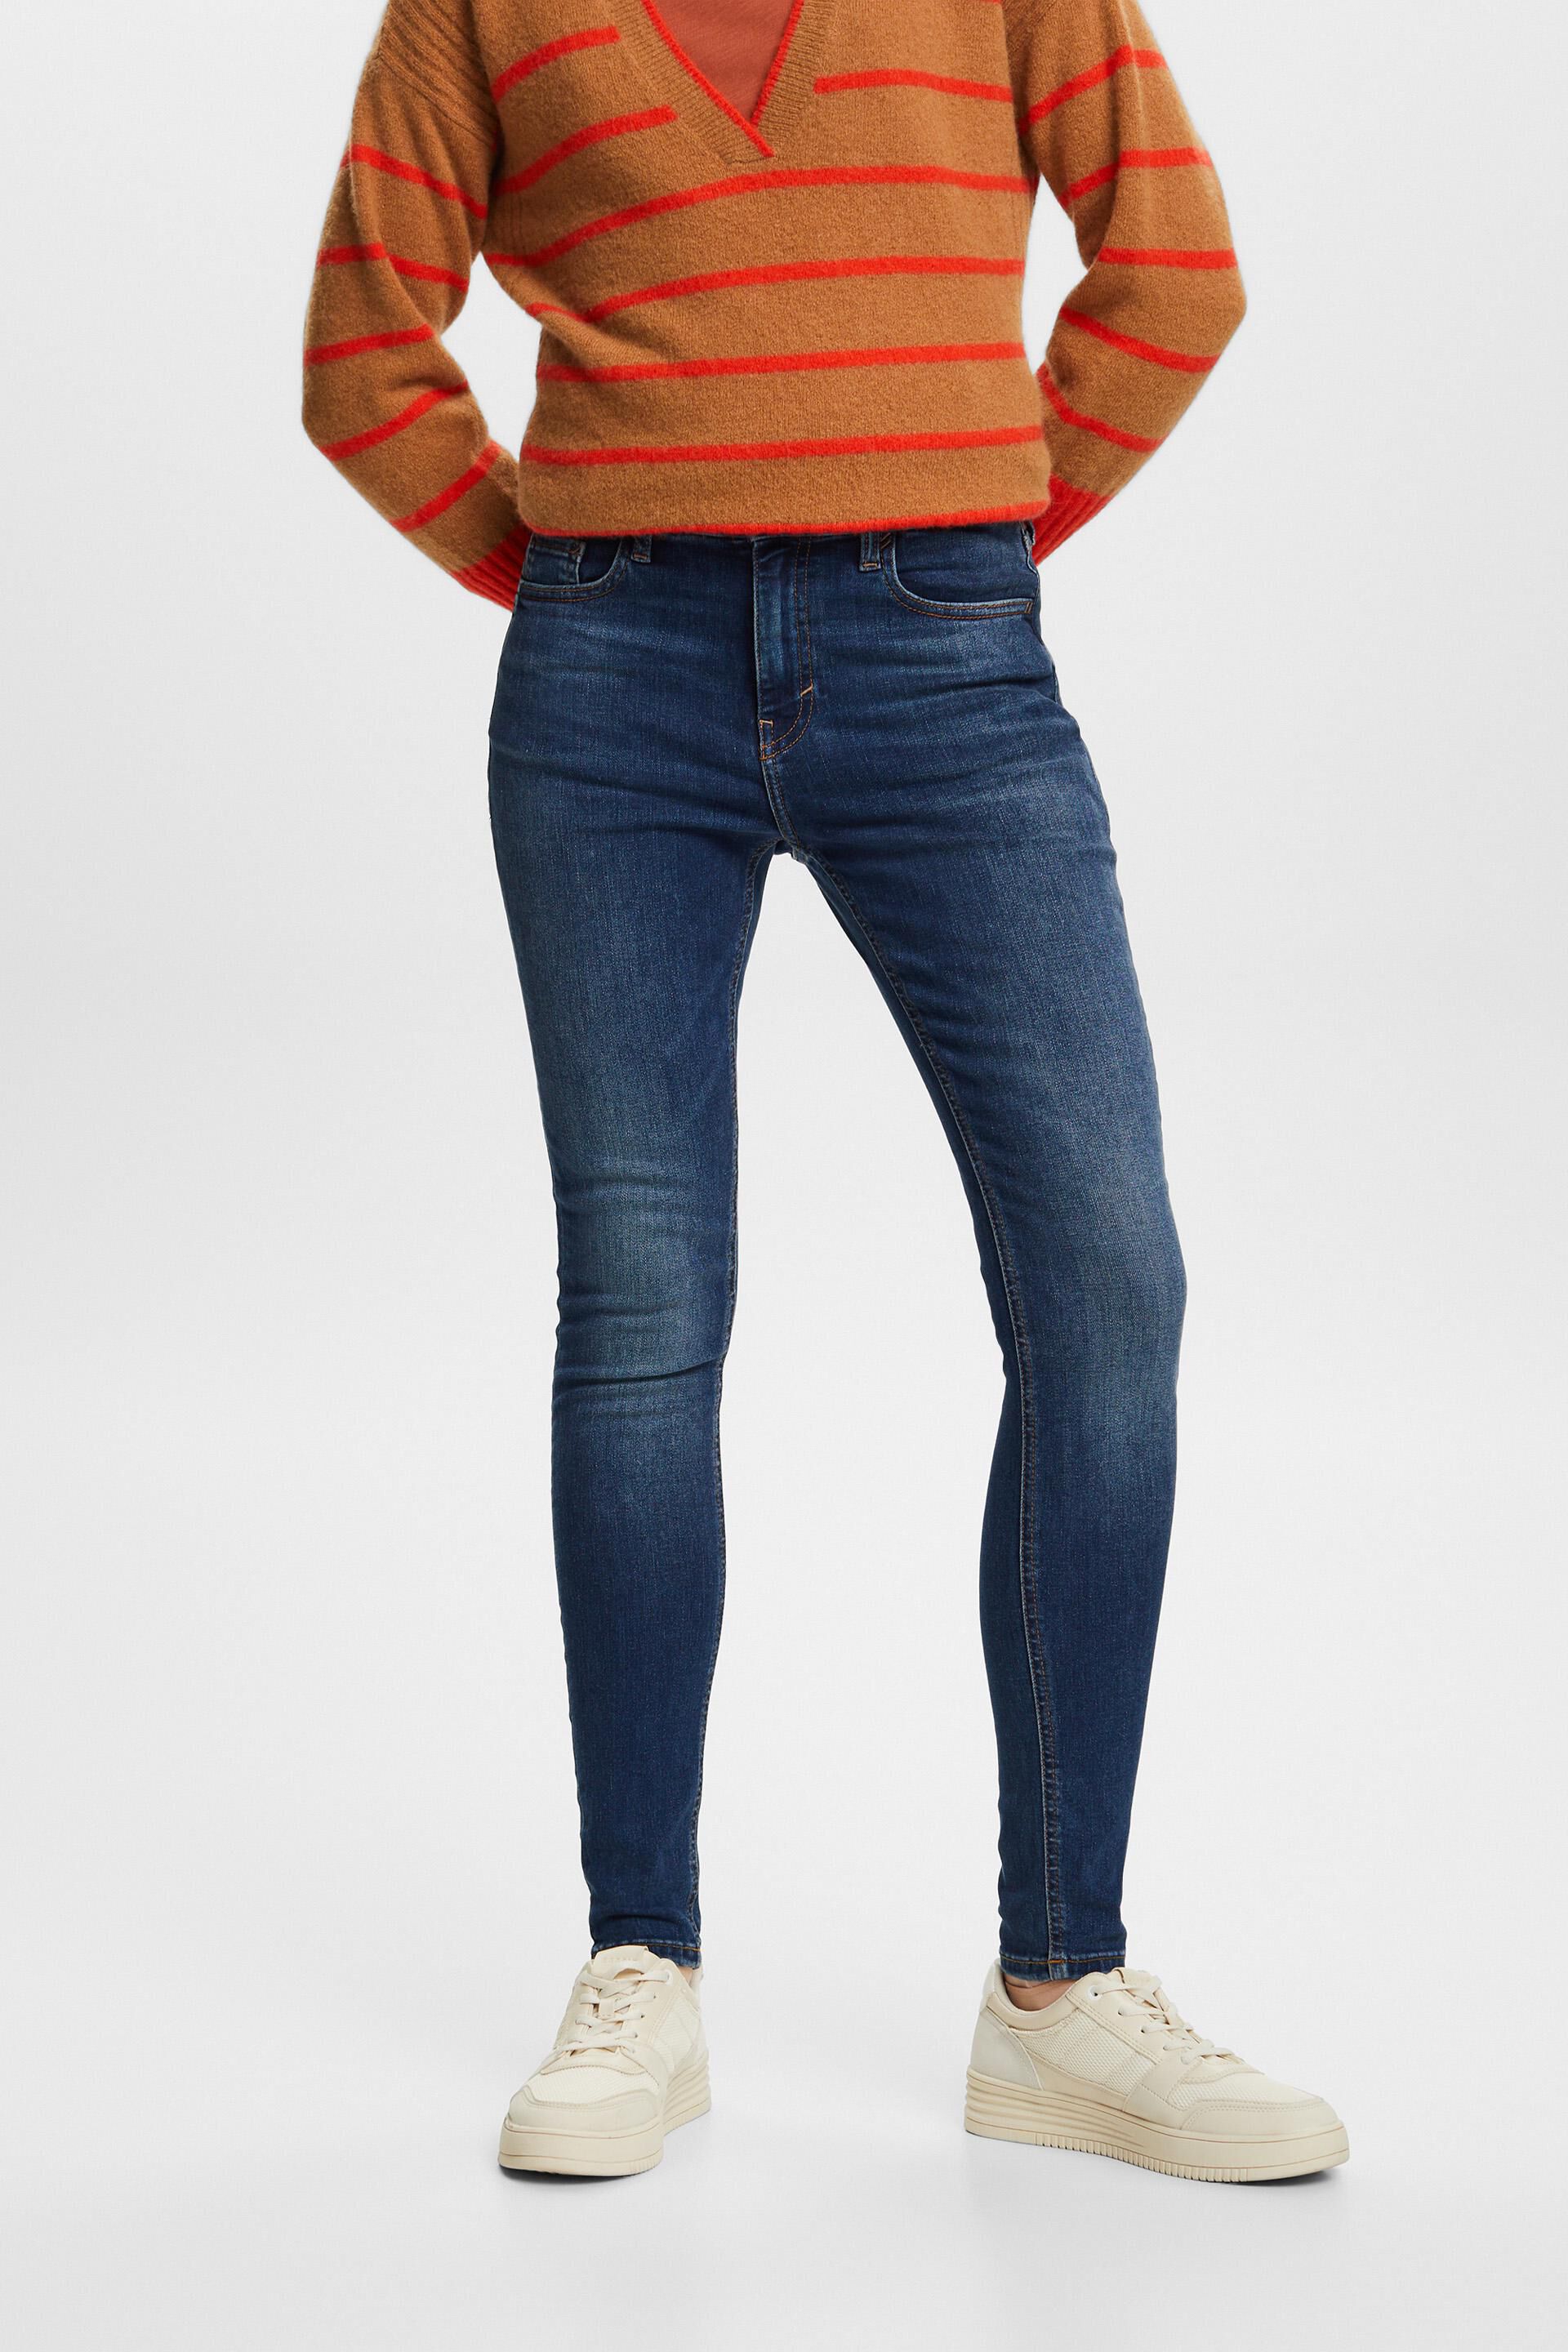 Esprit stretch jeans high-rise Recycled: fit skinny